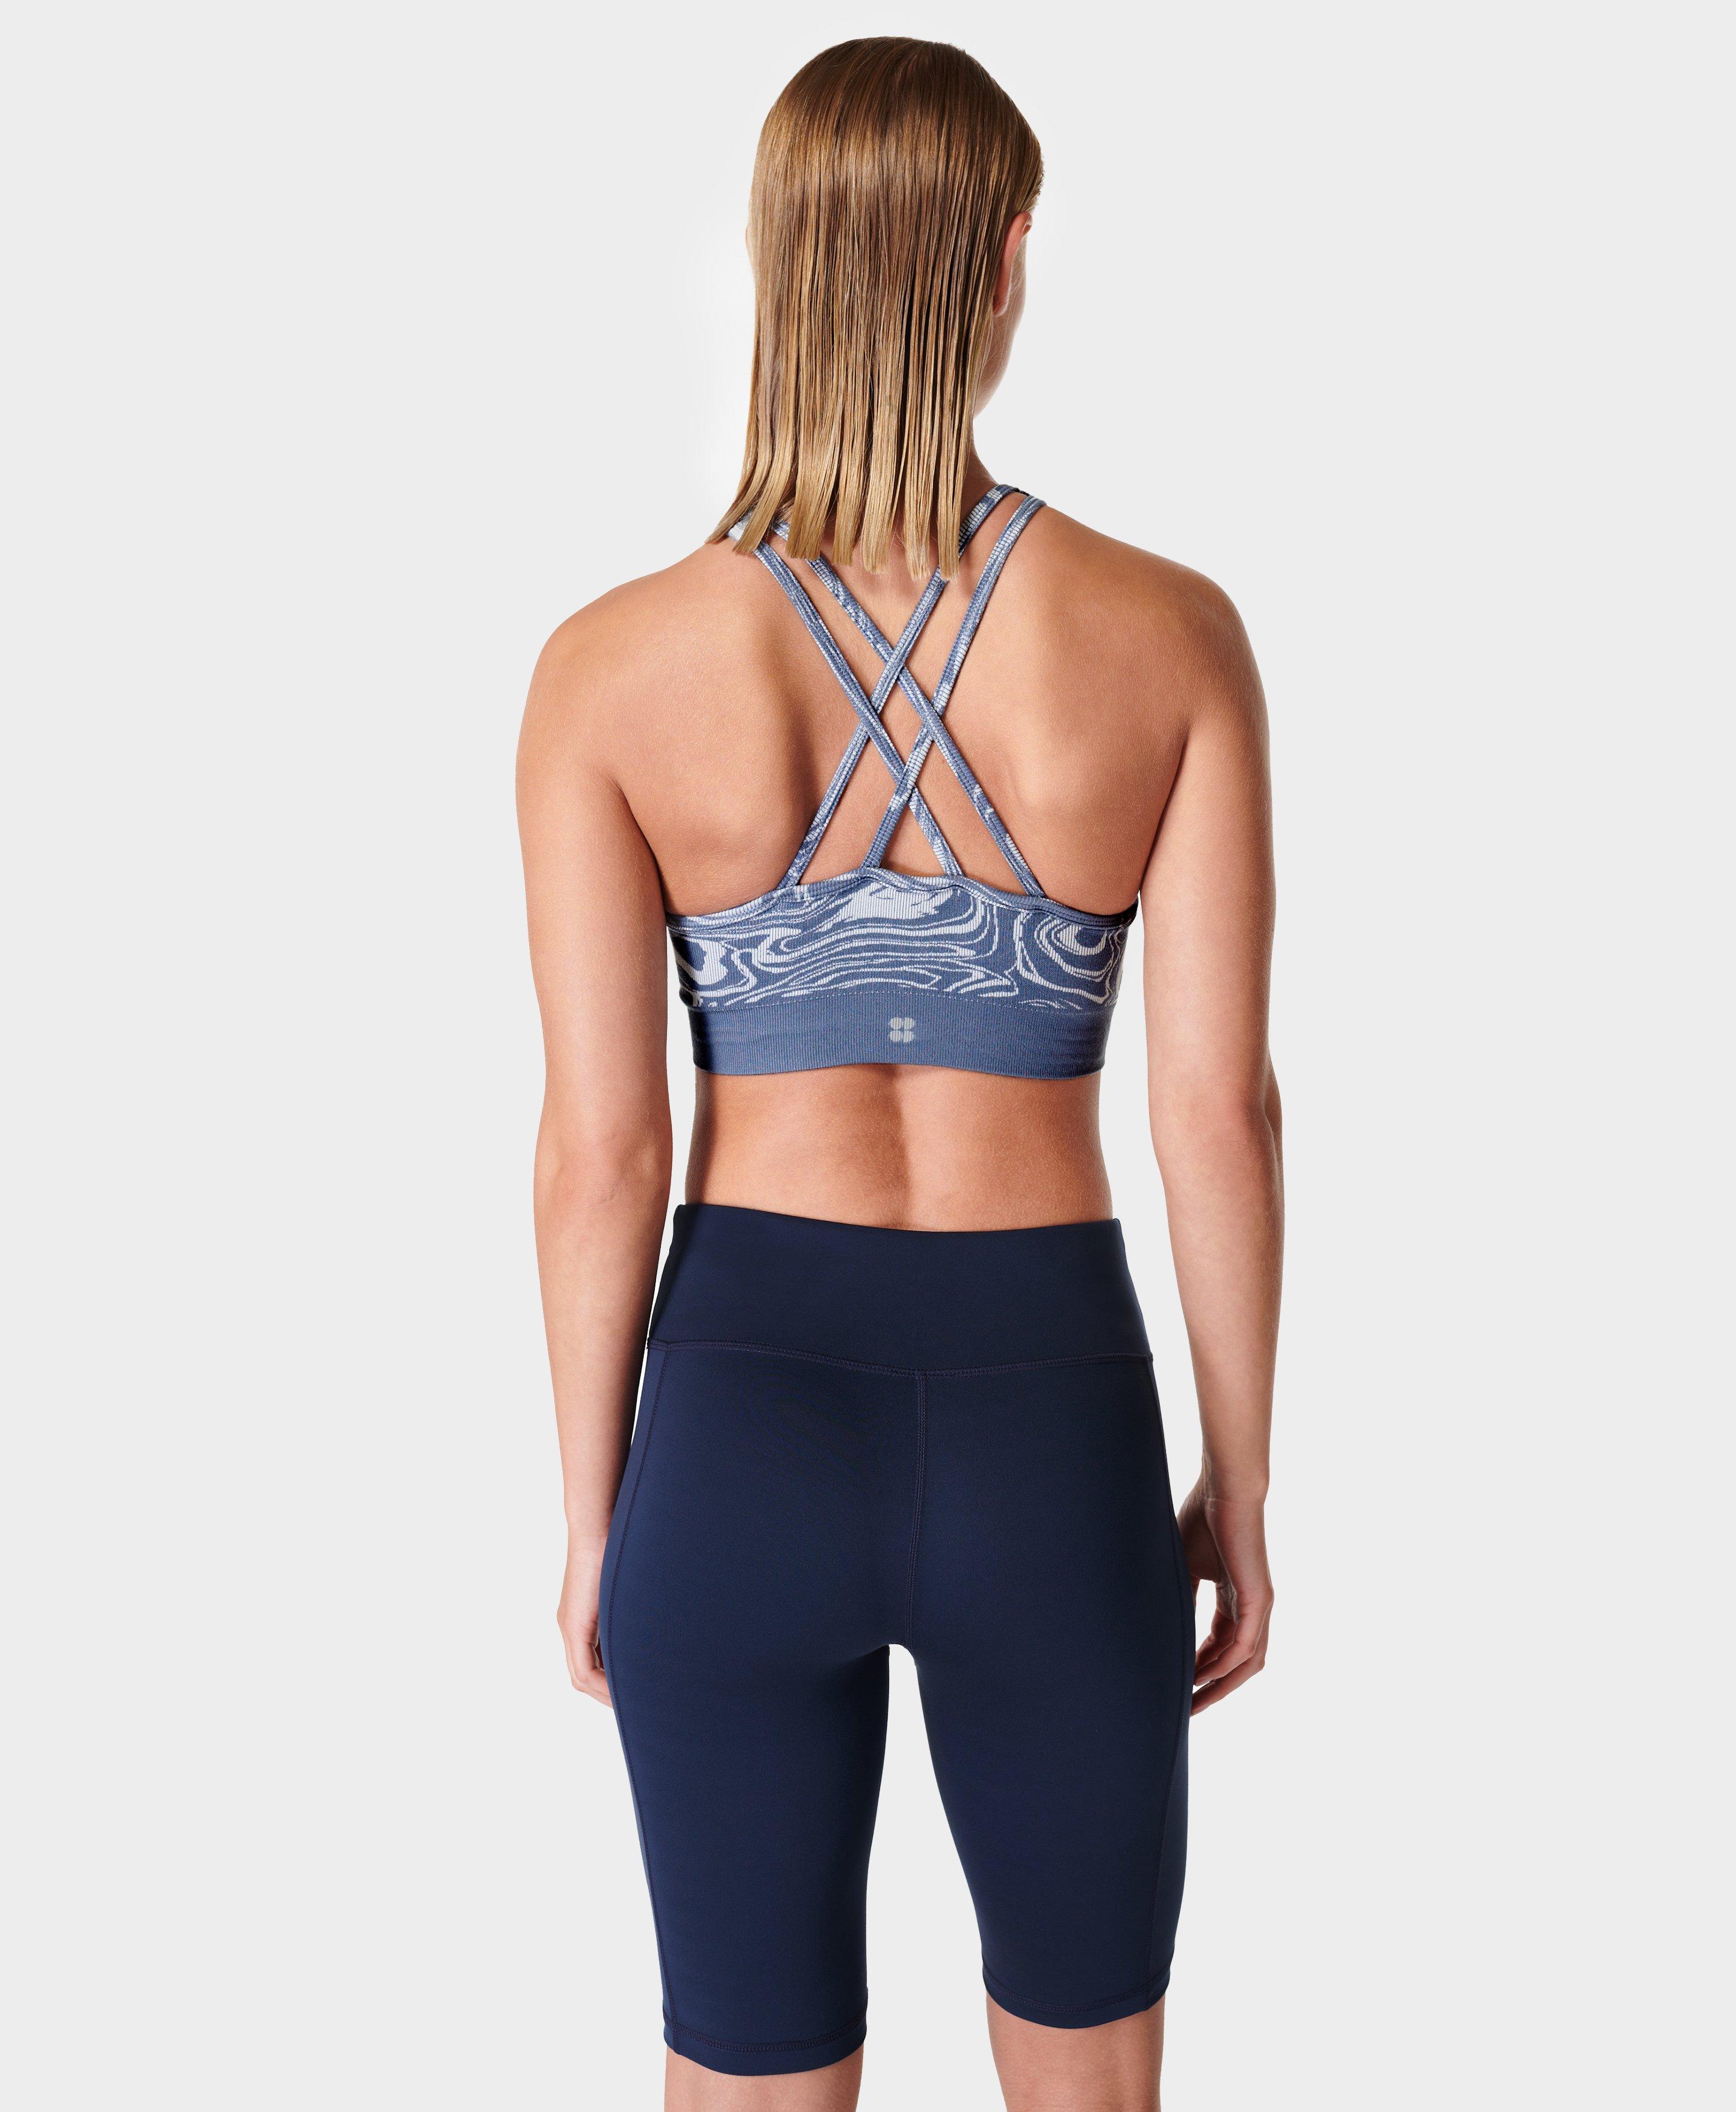 GUESS Doreen Active Bra - Macy's  Womens athletic outfits, Sports bra  collection, Athletic women